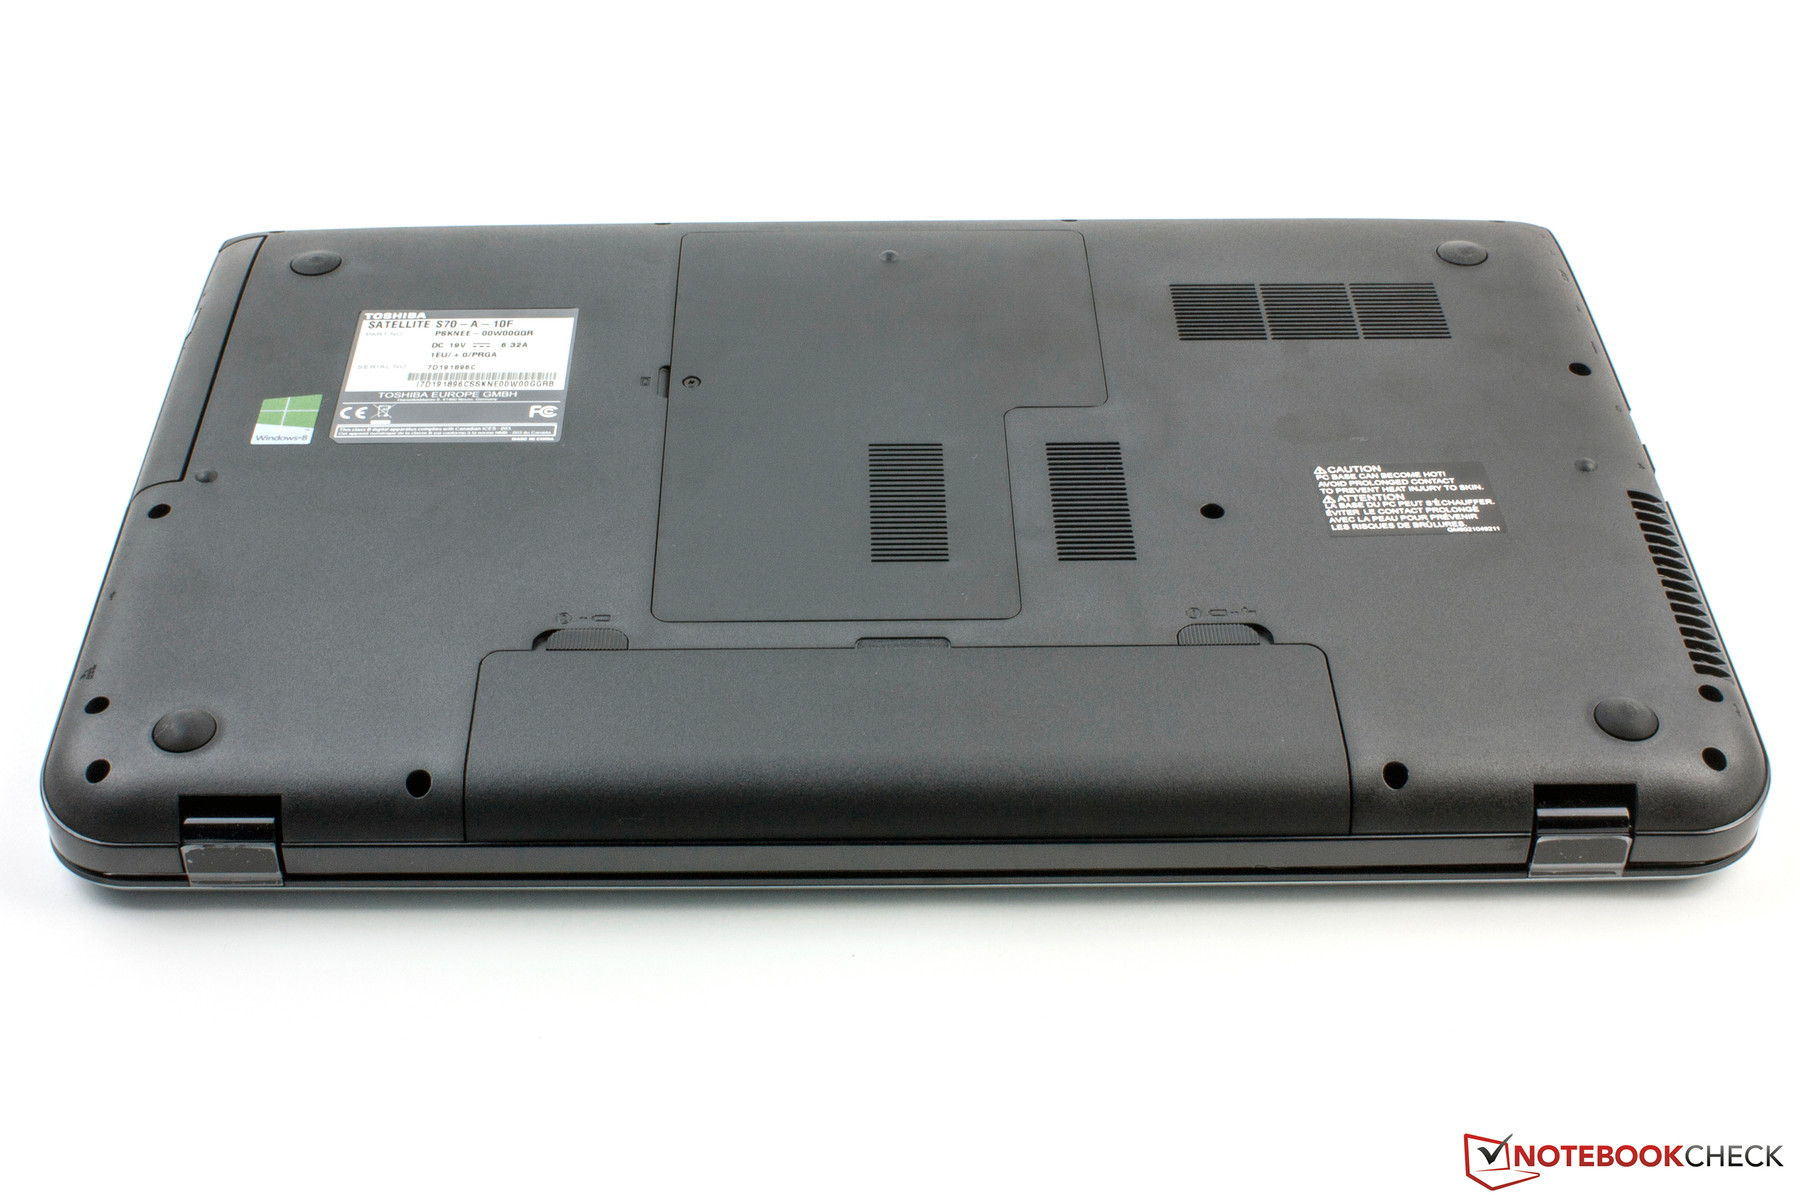 Toshiba Satellite S70-B-106 Notebook Review Update - NotebookCheck ...